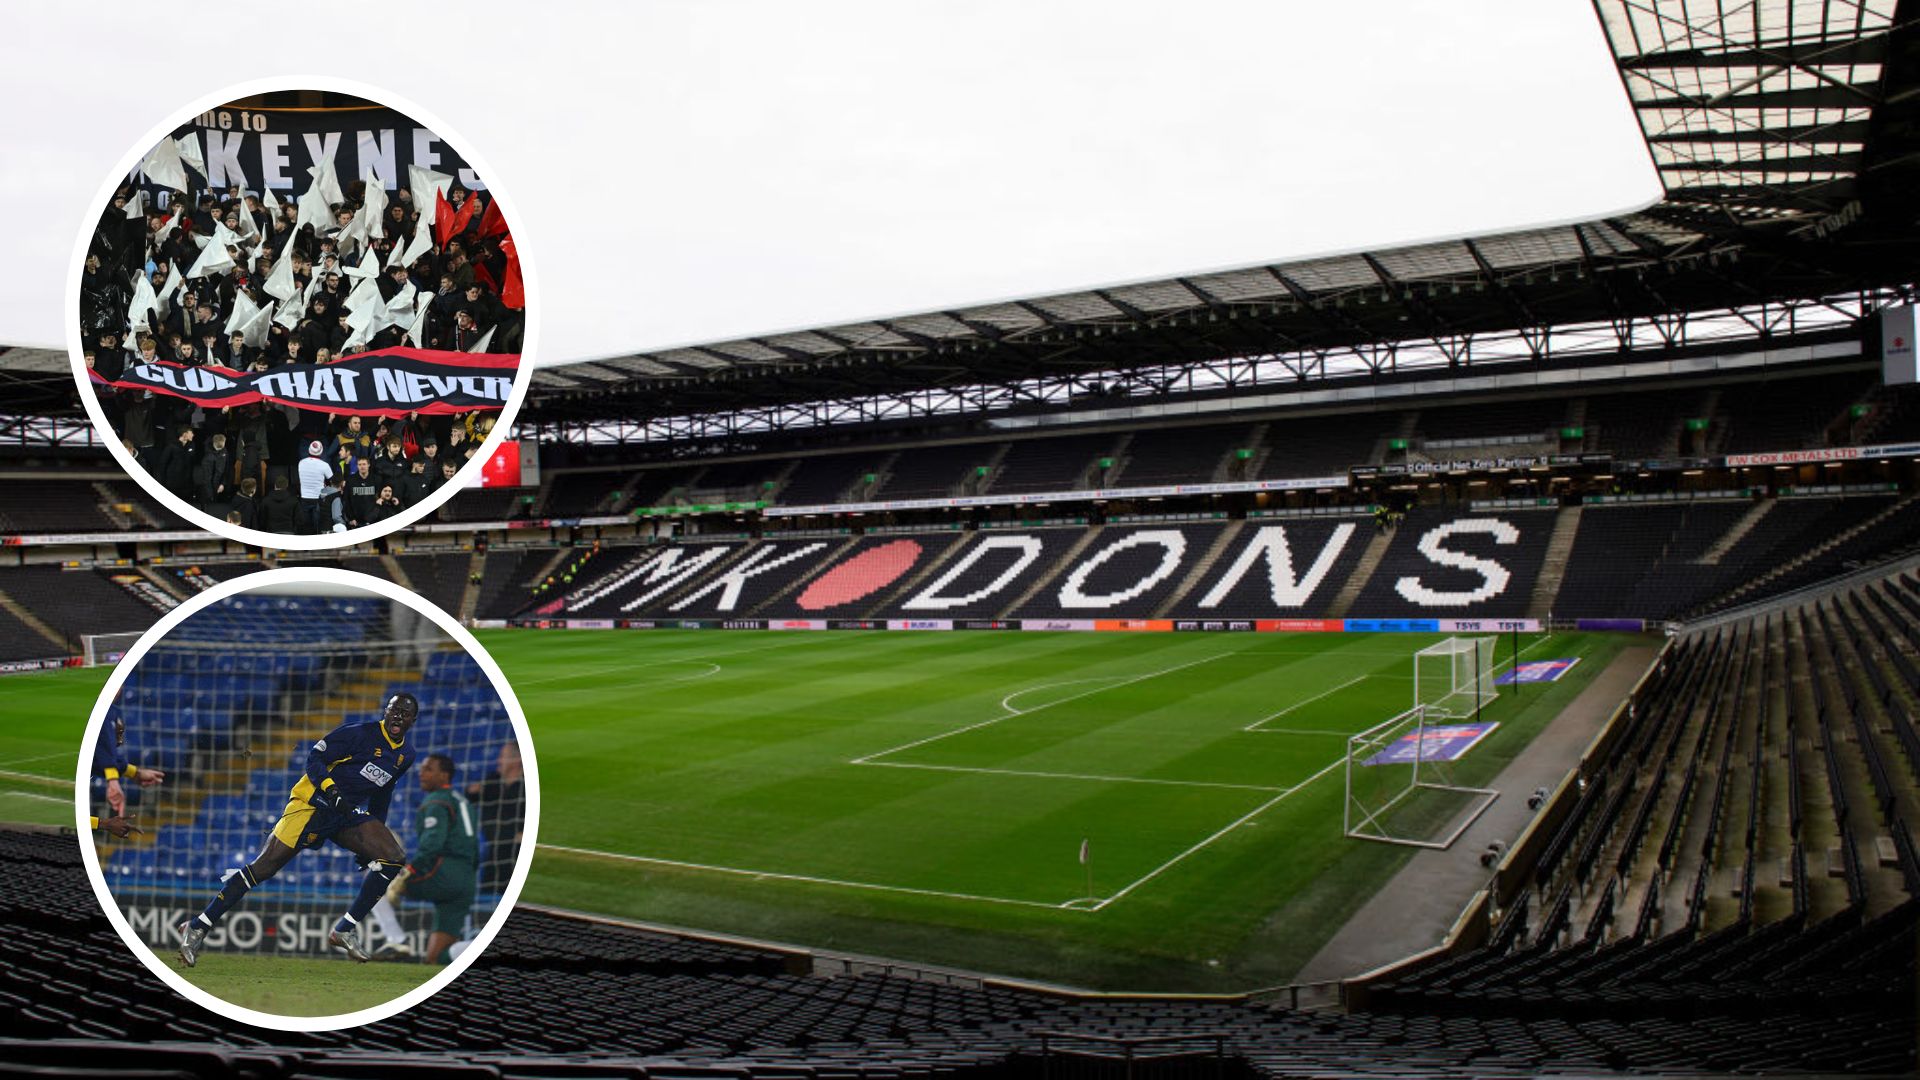 Meet the fan who followed Wimbledon from Selhurst Park to Milton Keynes in 2003 and has remained an MK Dons fan for 20 years